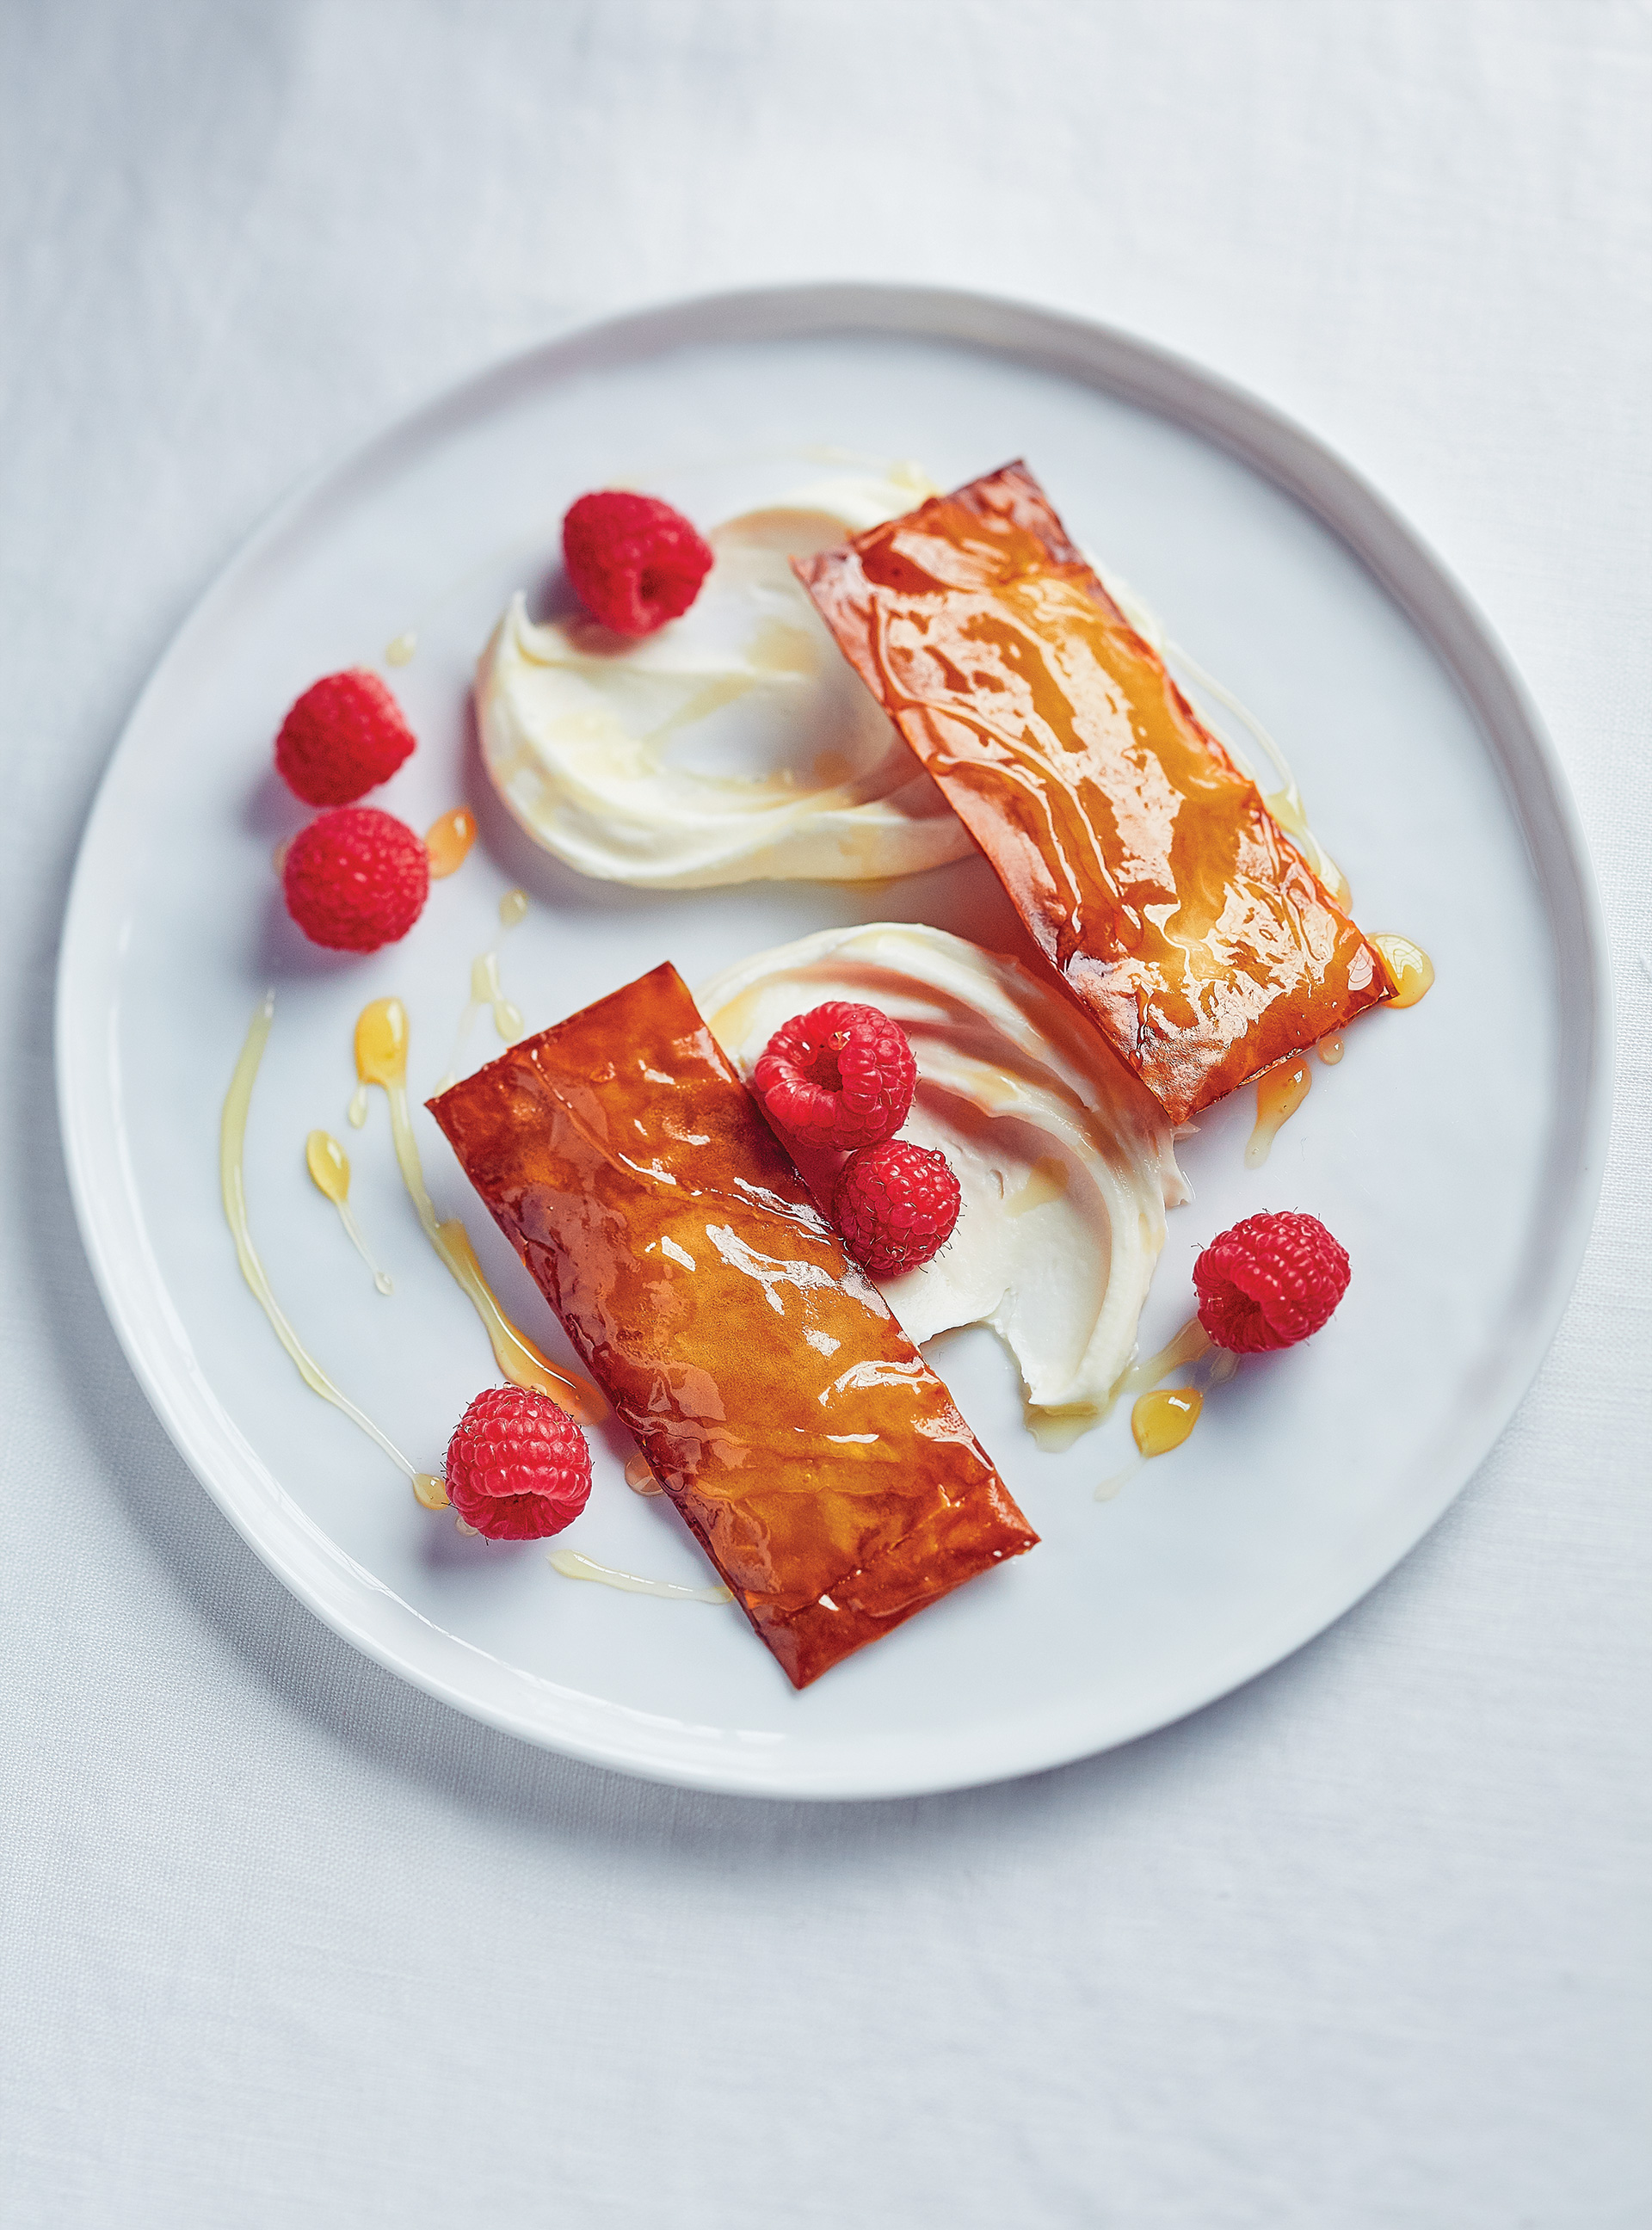 Raspberry and Mascarpone with Phyllo Puffs